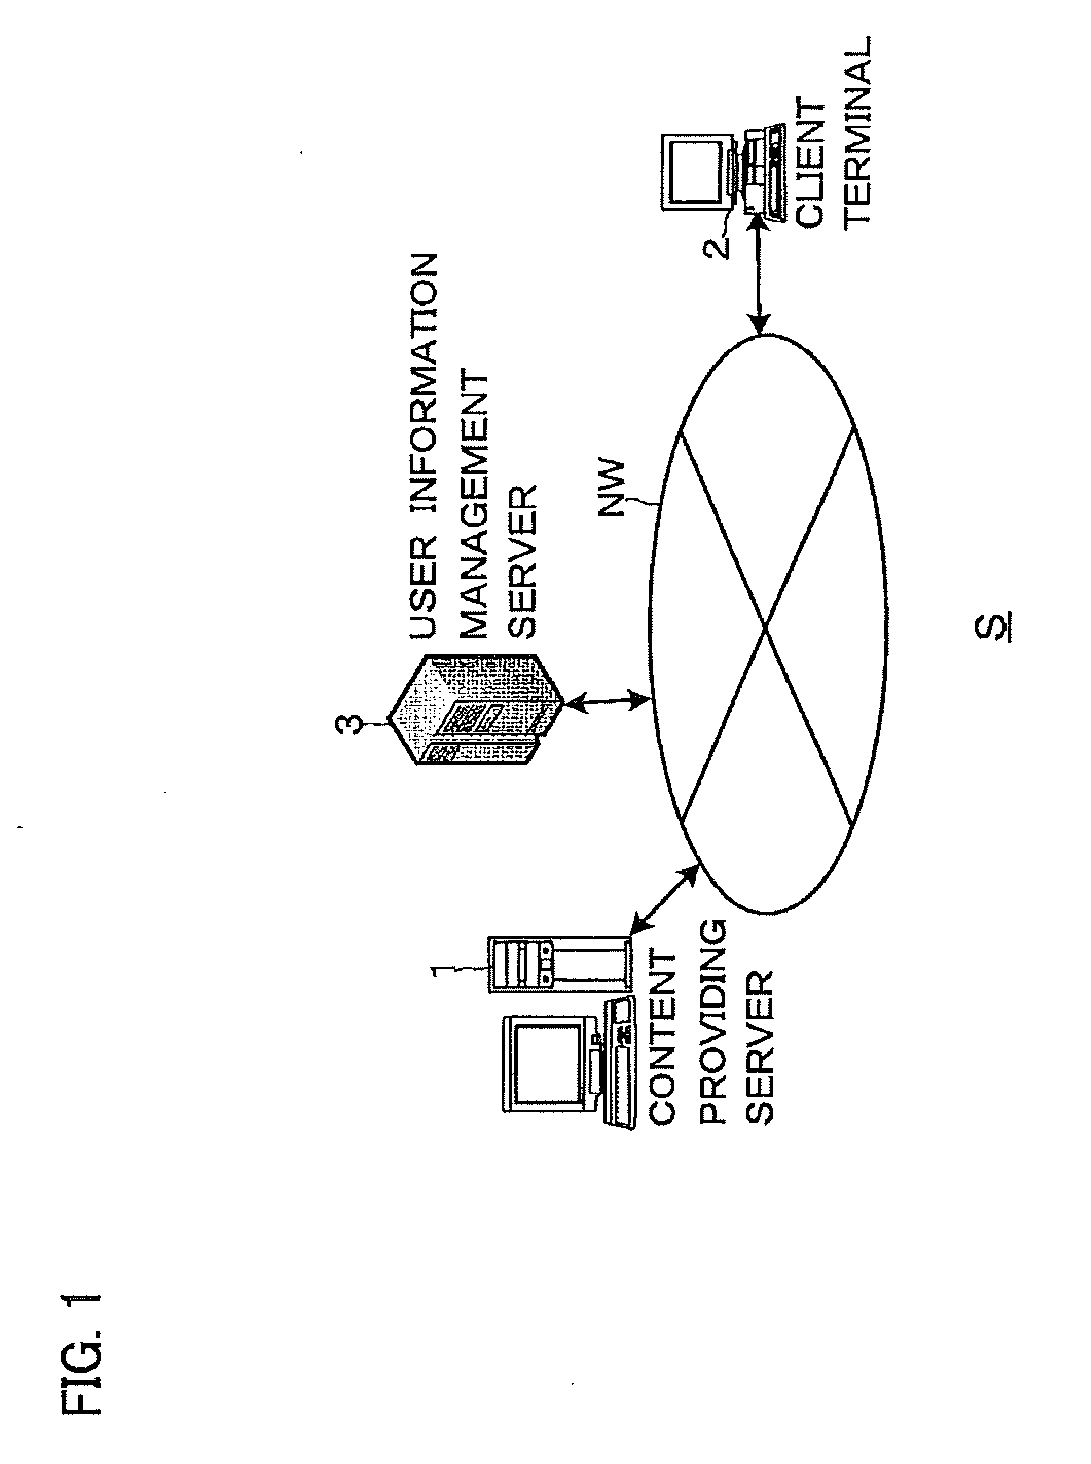 Dynamically selecting stored content for display based on real-time parameters calculated for operations performed on image data displayed by an electronic device